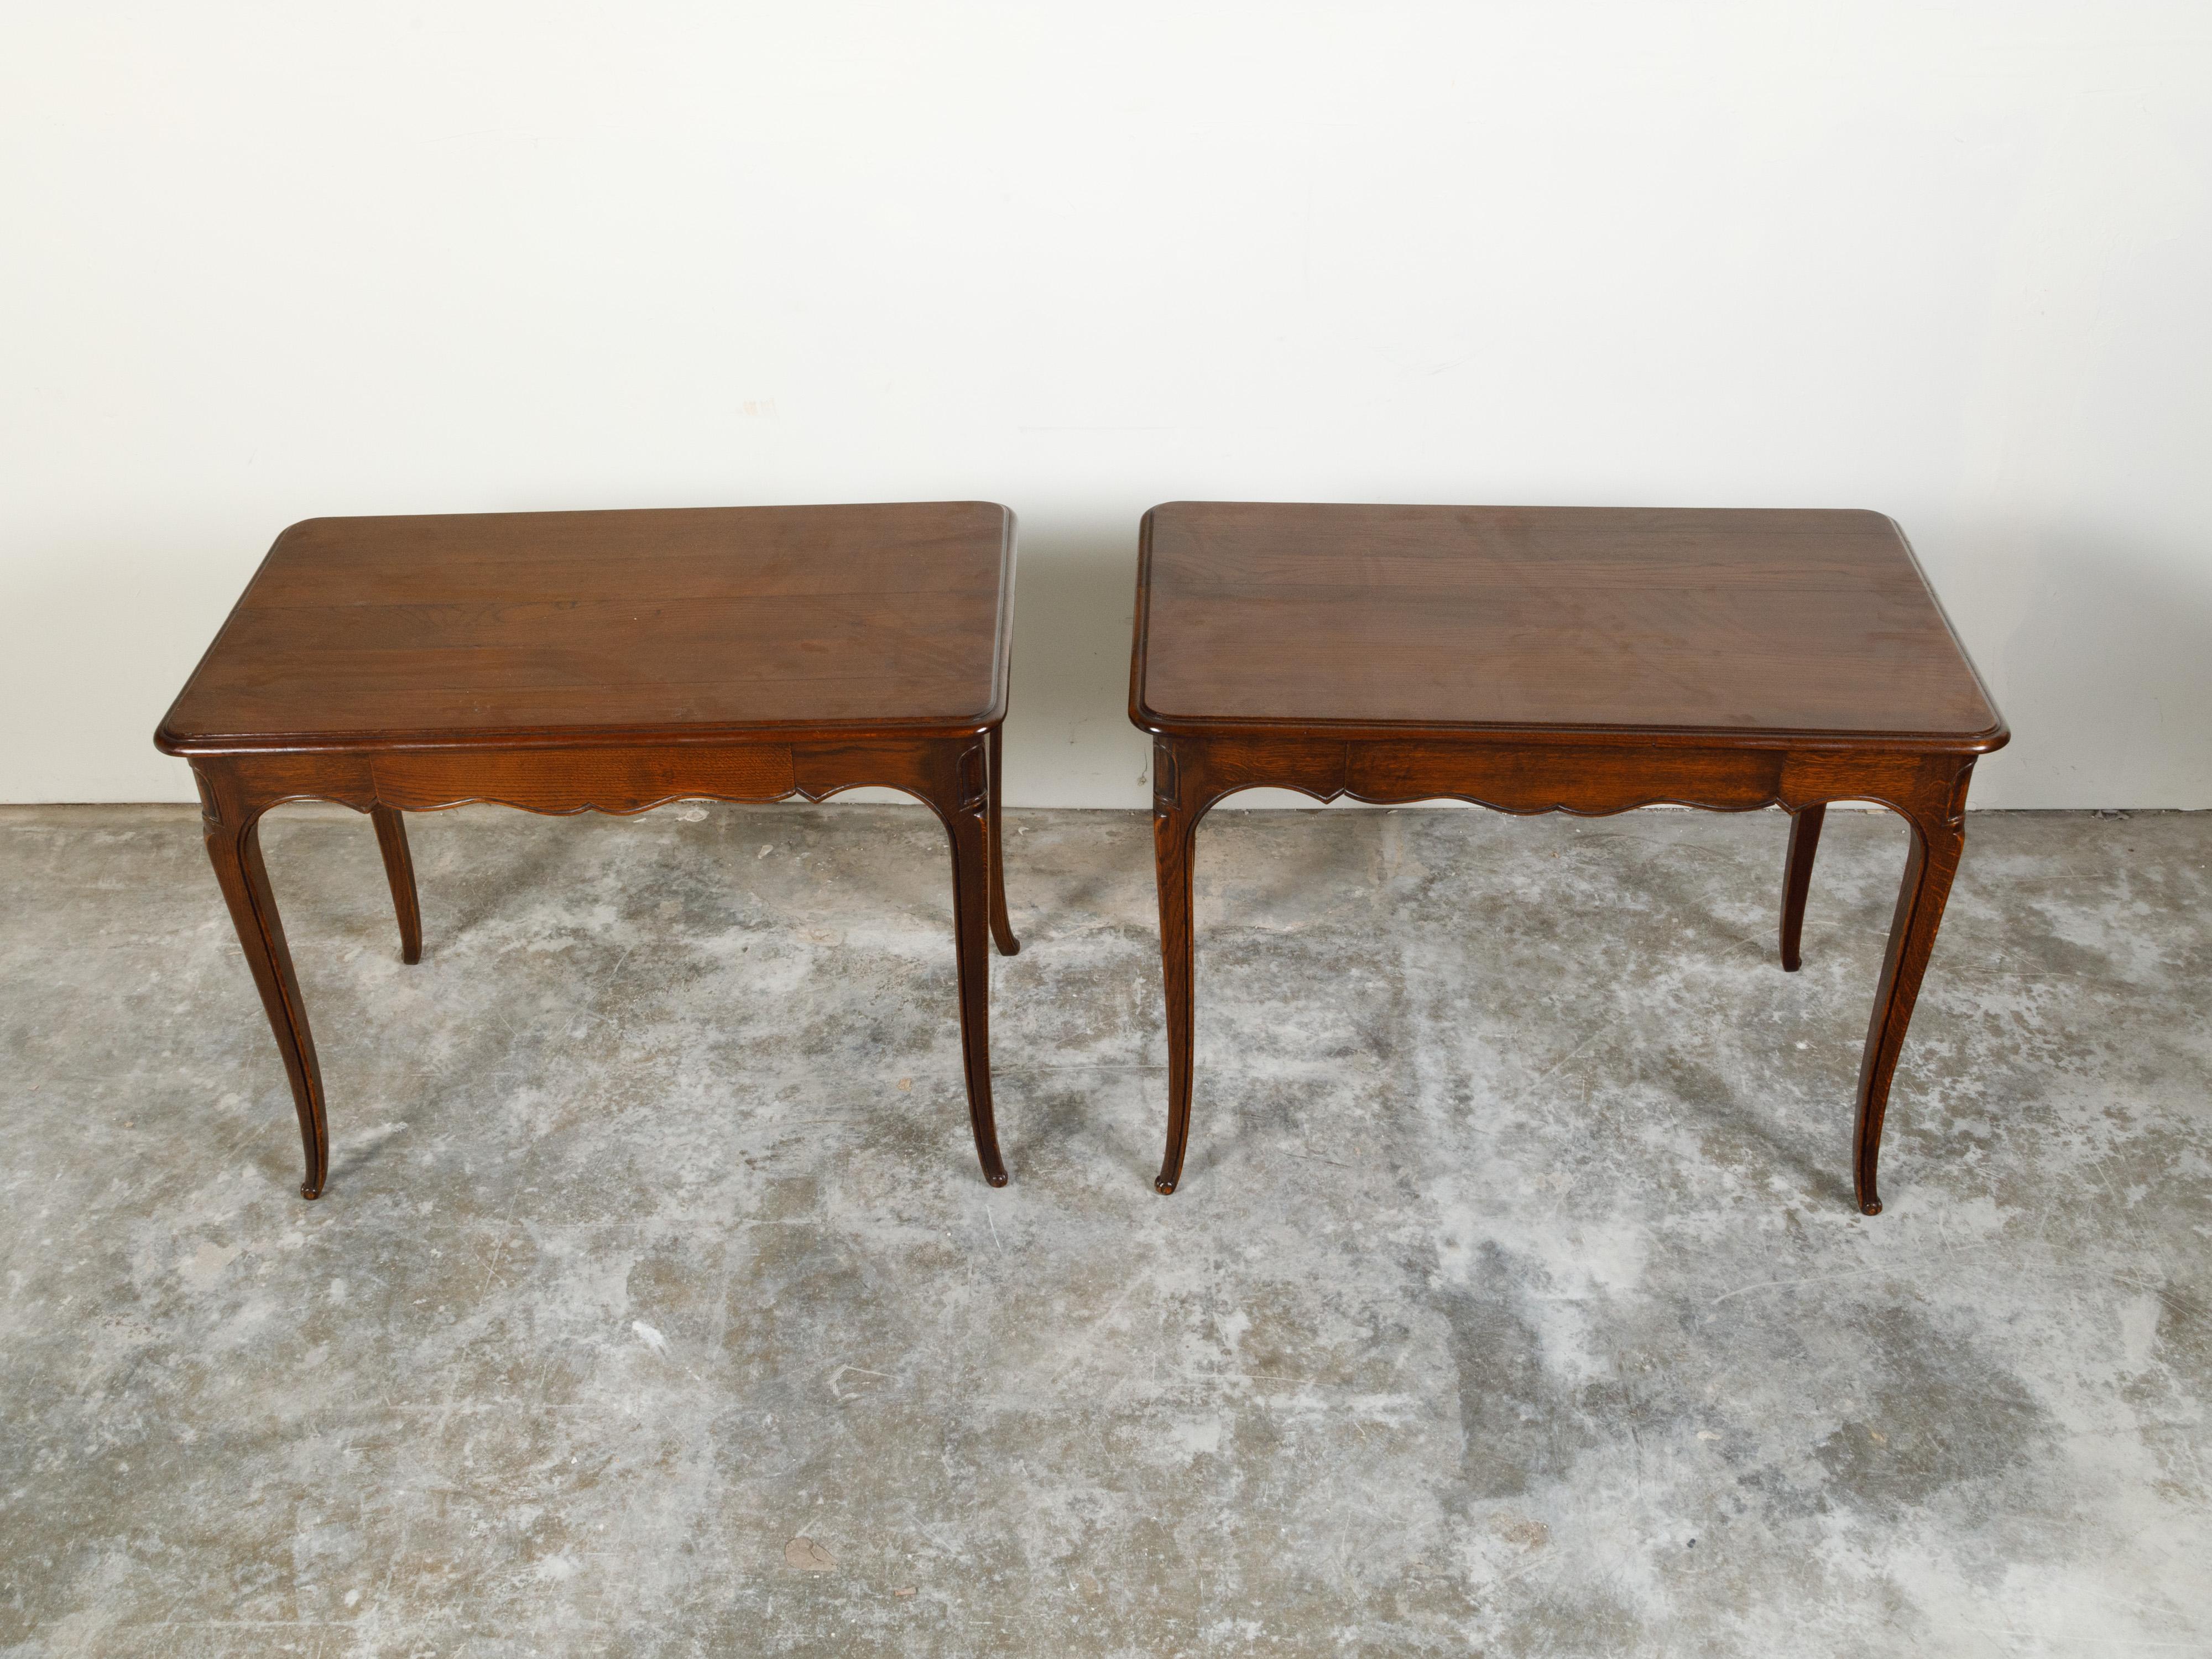 Carved Pair of French 1900s Oak Console Tables with Single Drawers and Scalloped Aprons